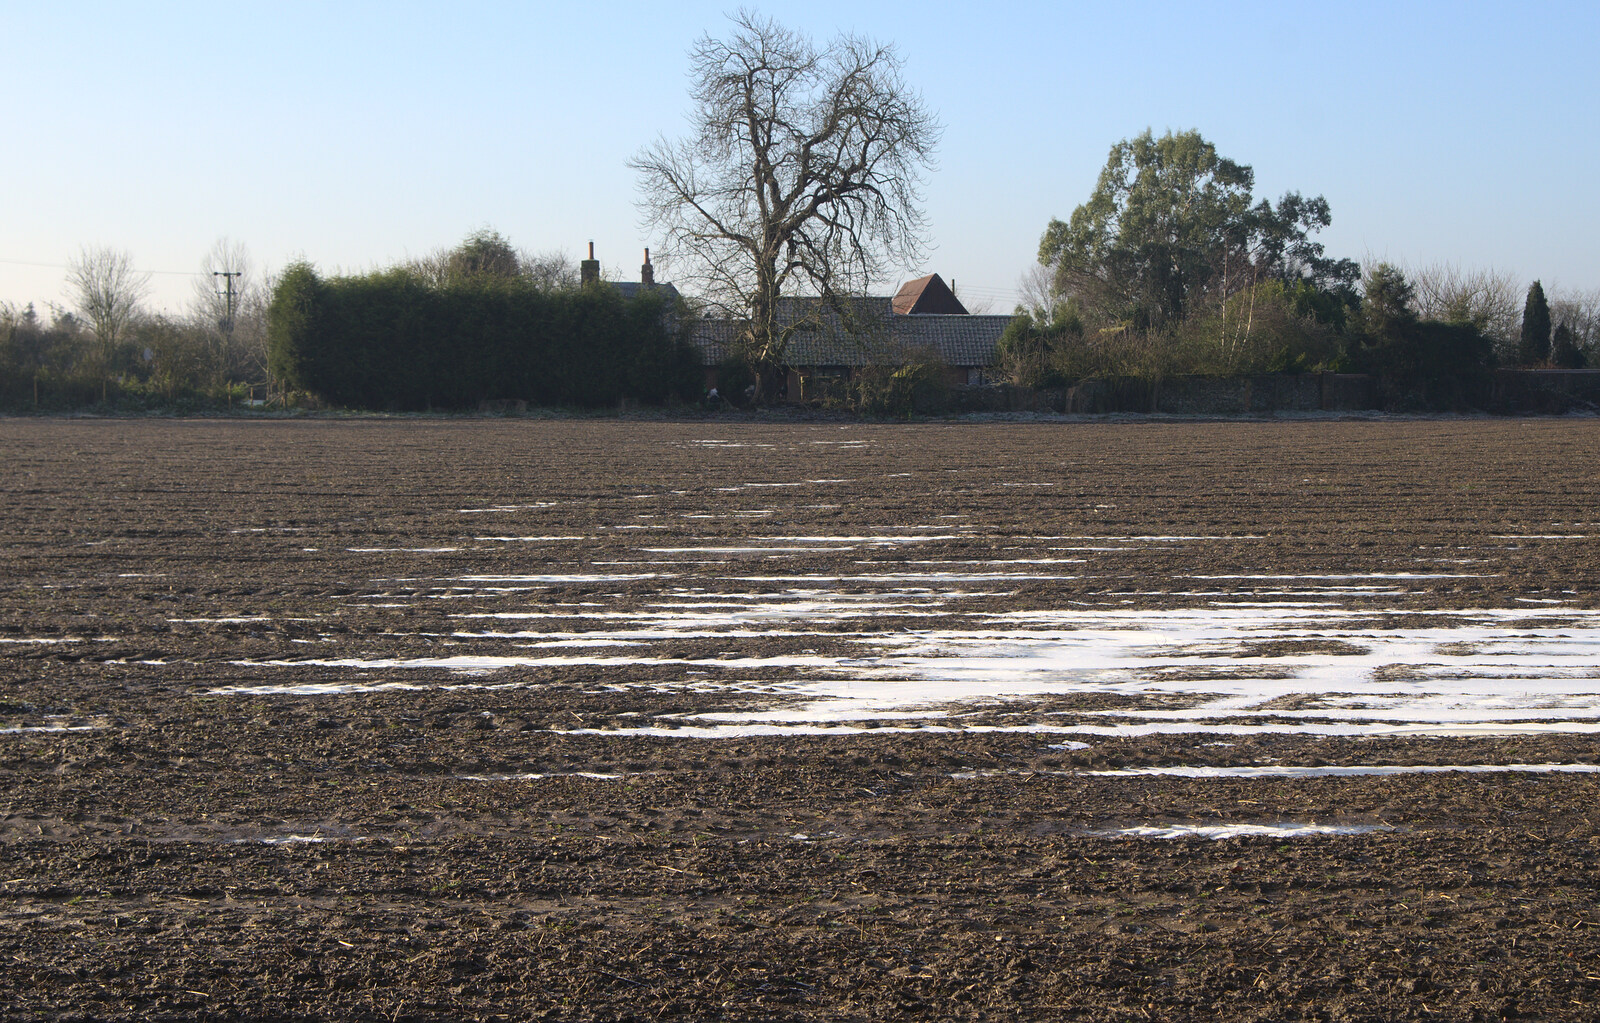 There's some ice on the side field from Christmas Day at the Swan Inn, Brome, Suffolk - 25th December 2014